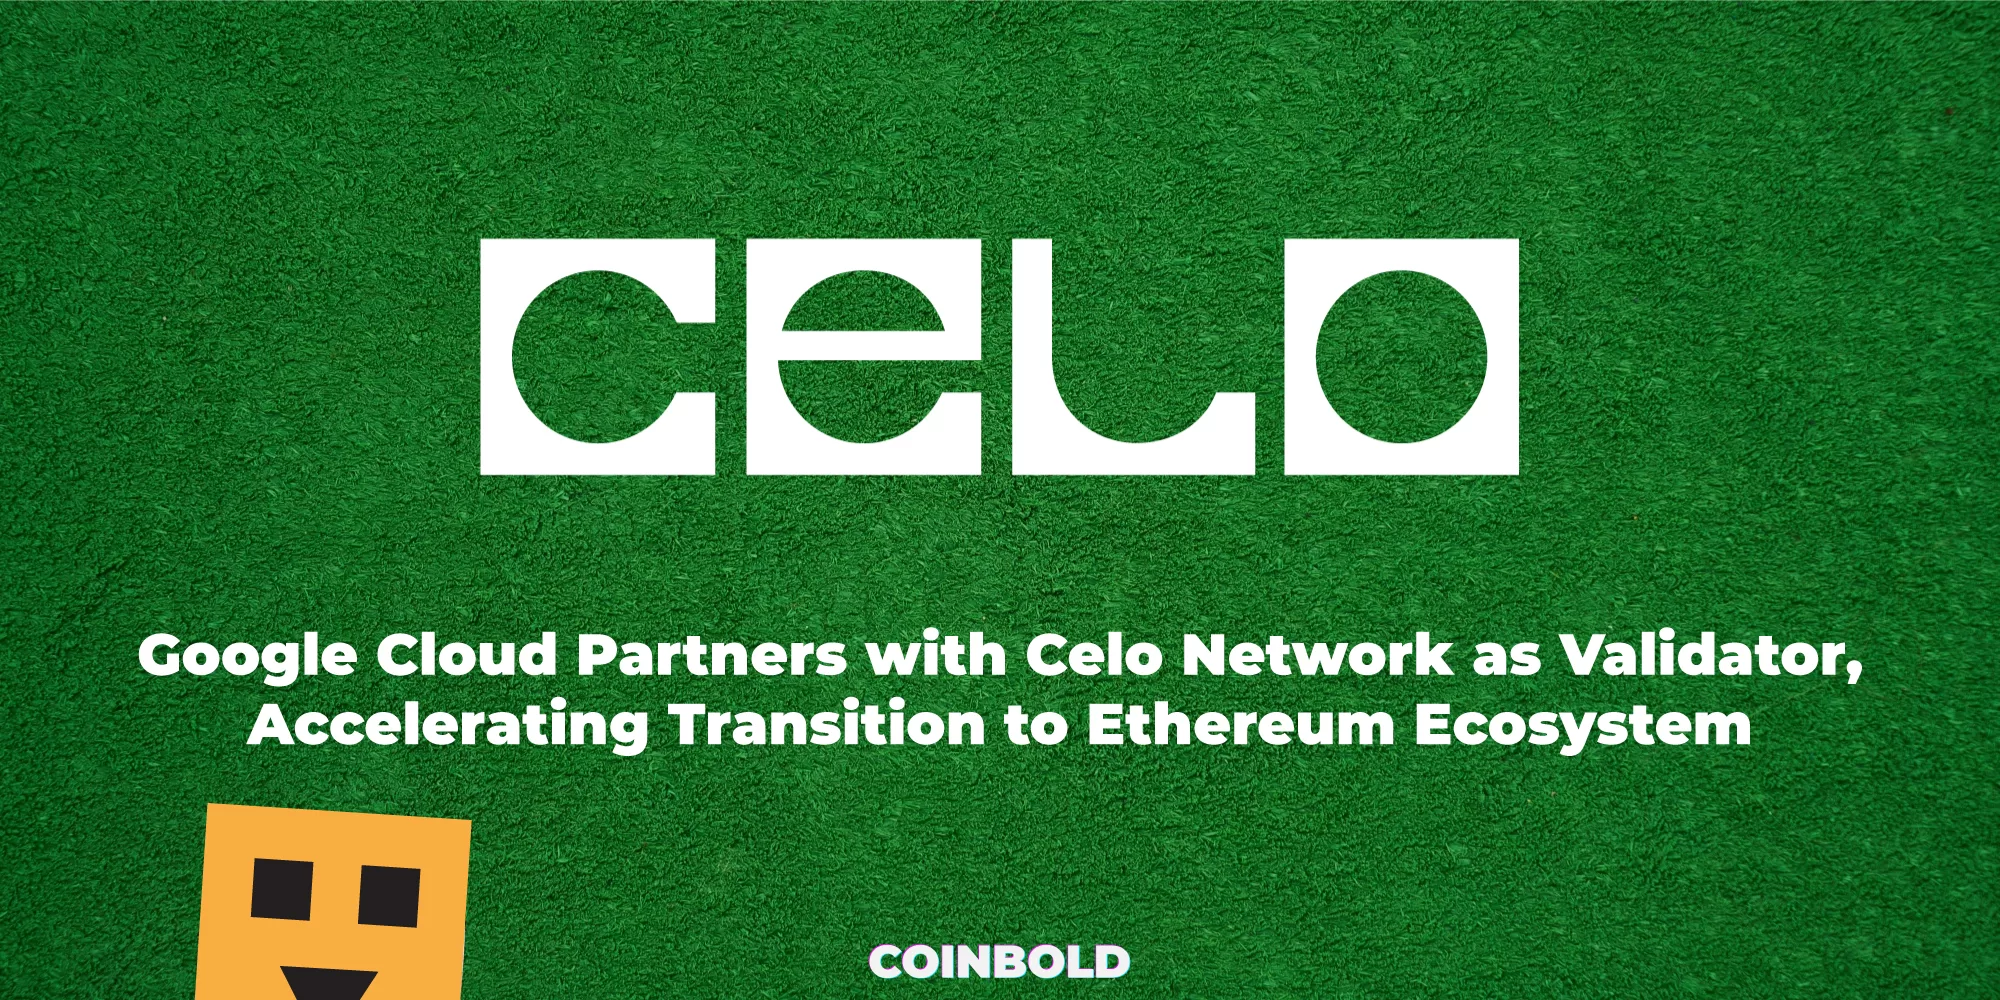 Google Cloud Partners with Celo Network as Validator, Accelerating Transition to Ethereum Ecosystem